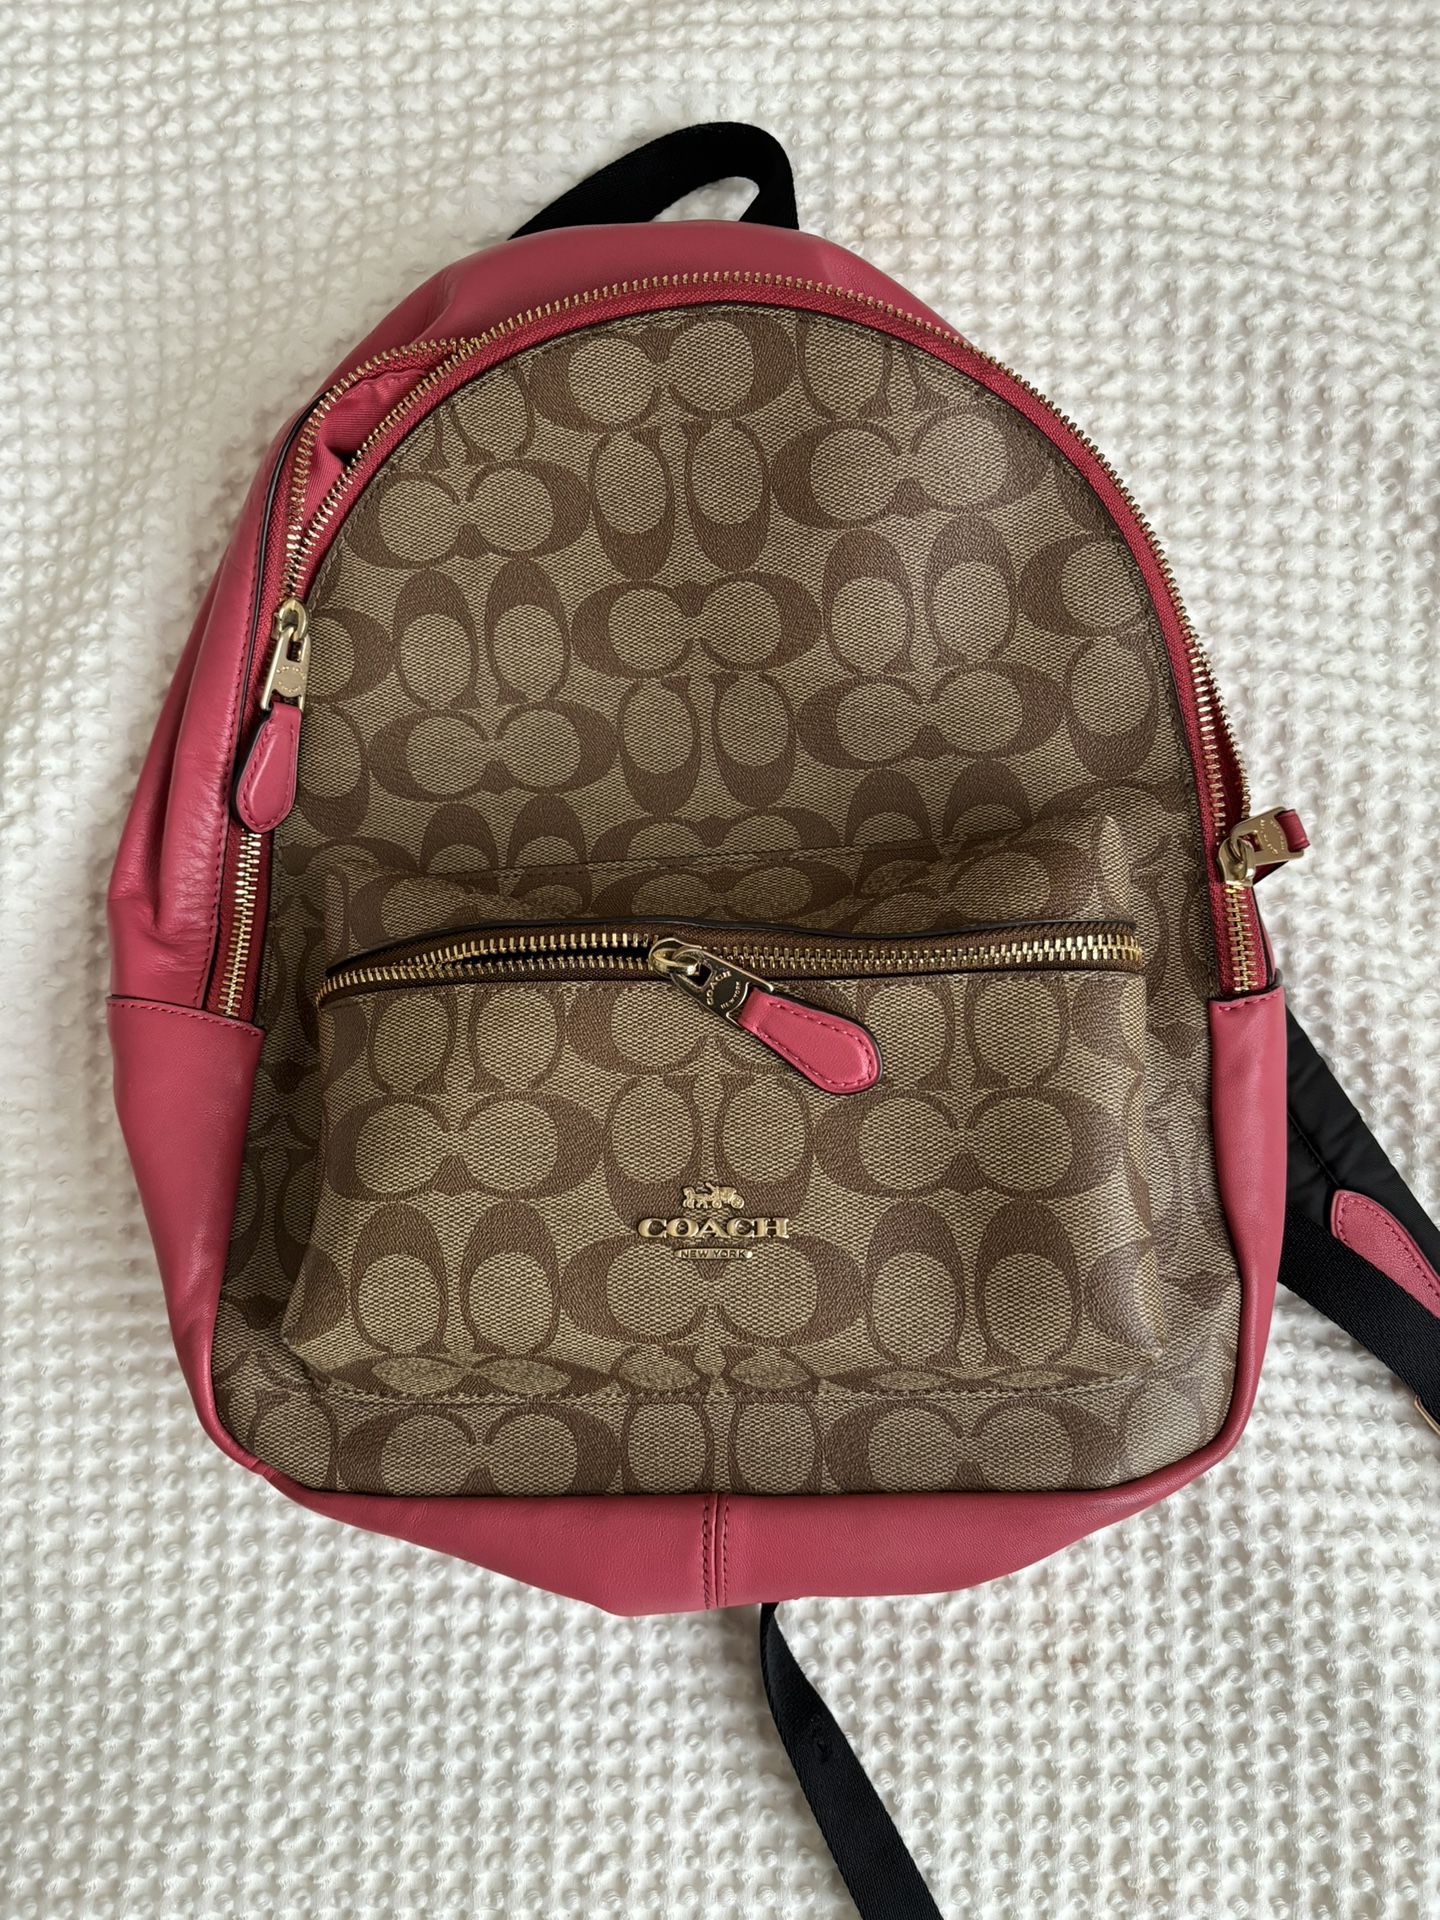 Authentic Pink Coach Backpack - Signature Canvas Print 